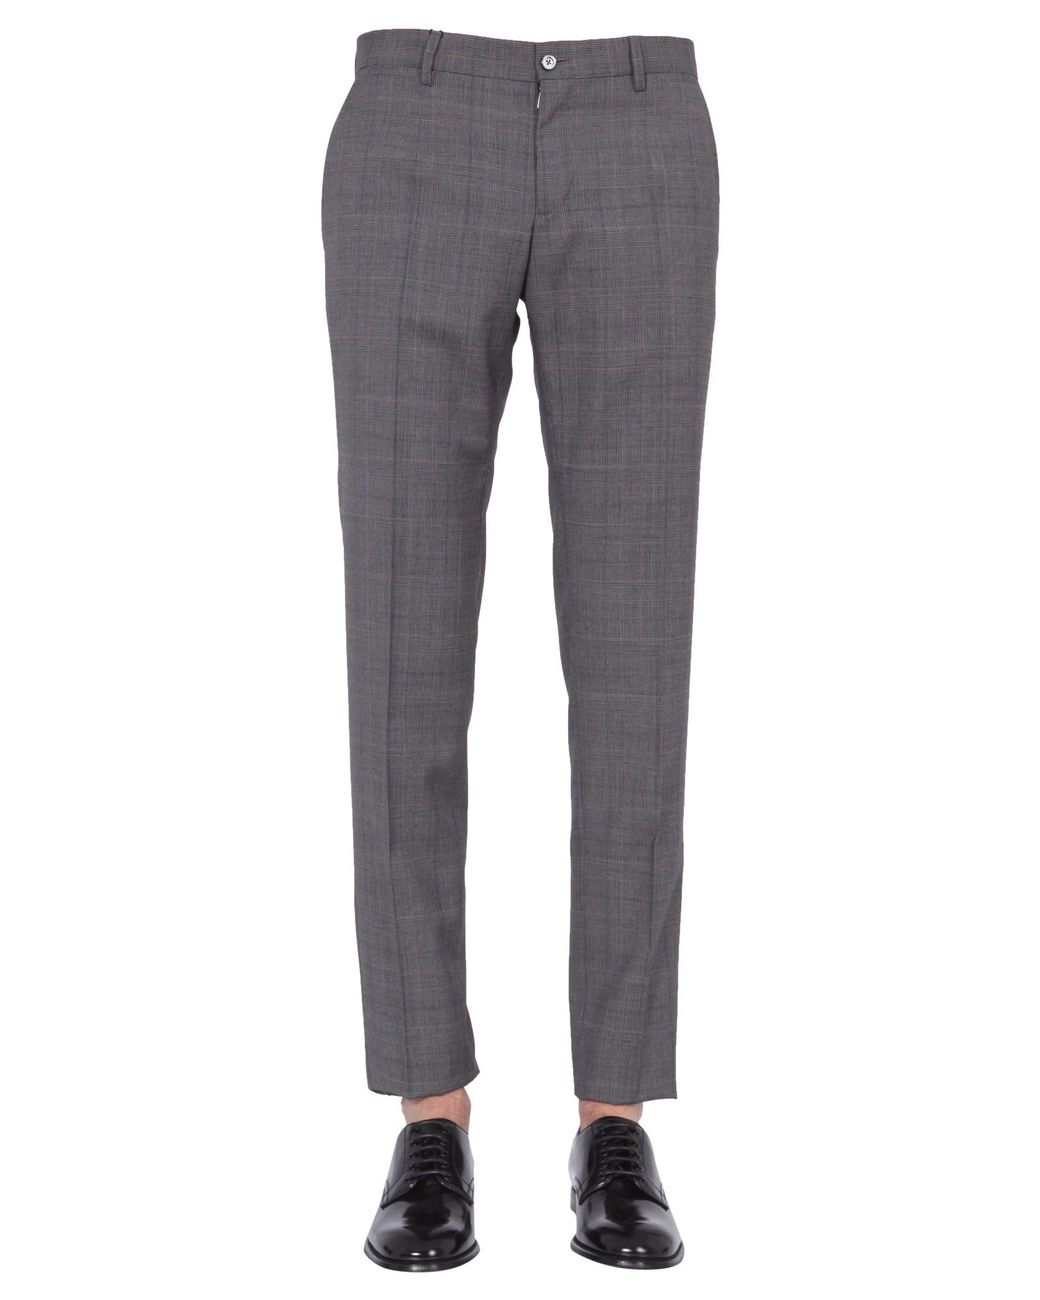 Dolce & Gabbana Prince Of Wales Wool Pants in Grey (Gray) for Men - Lyst